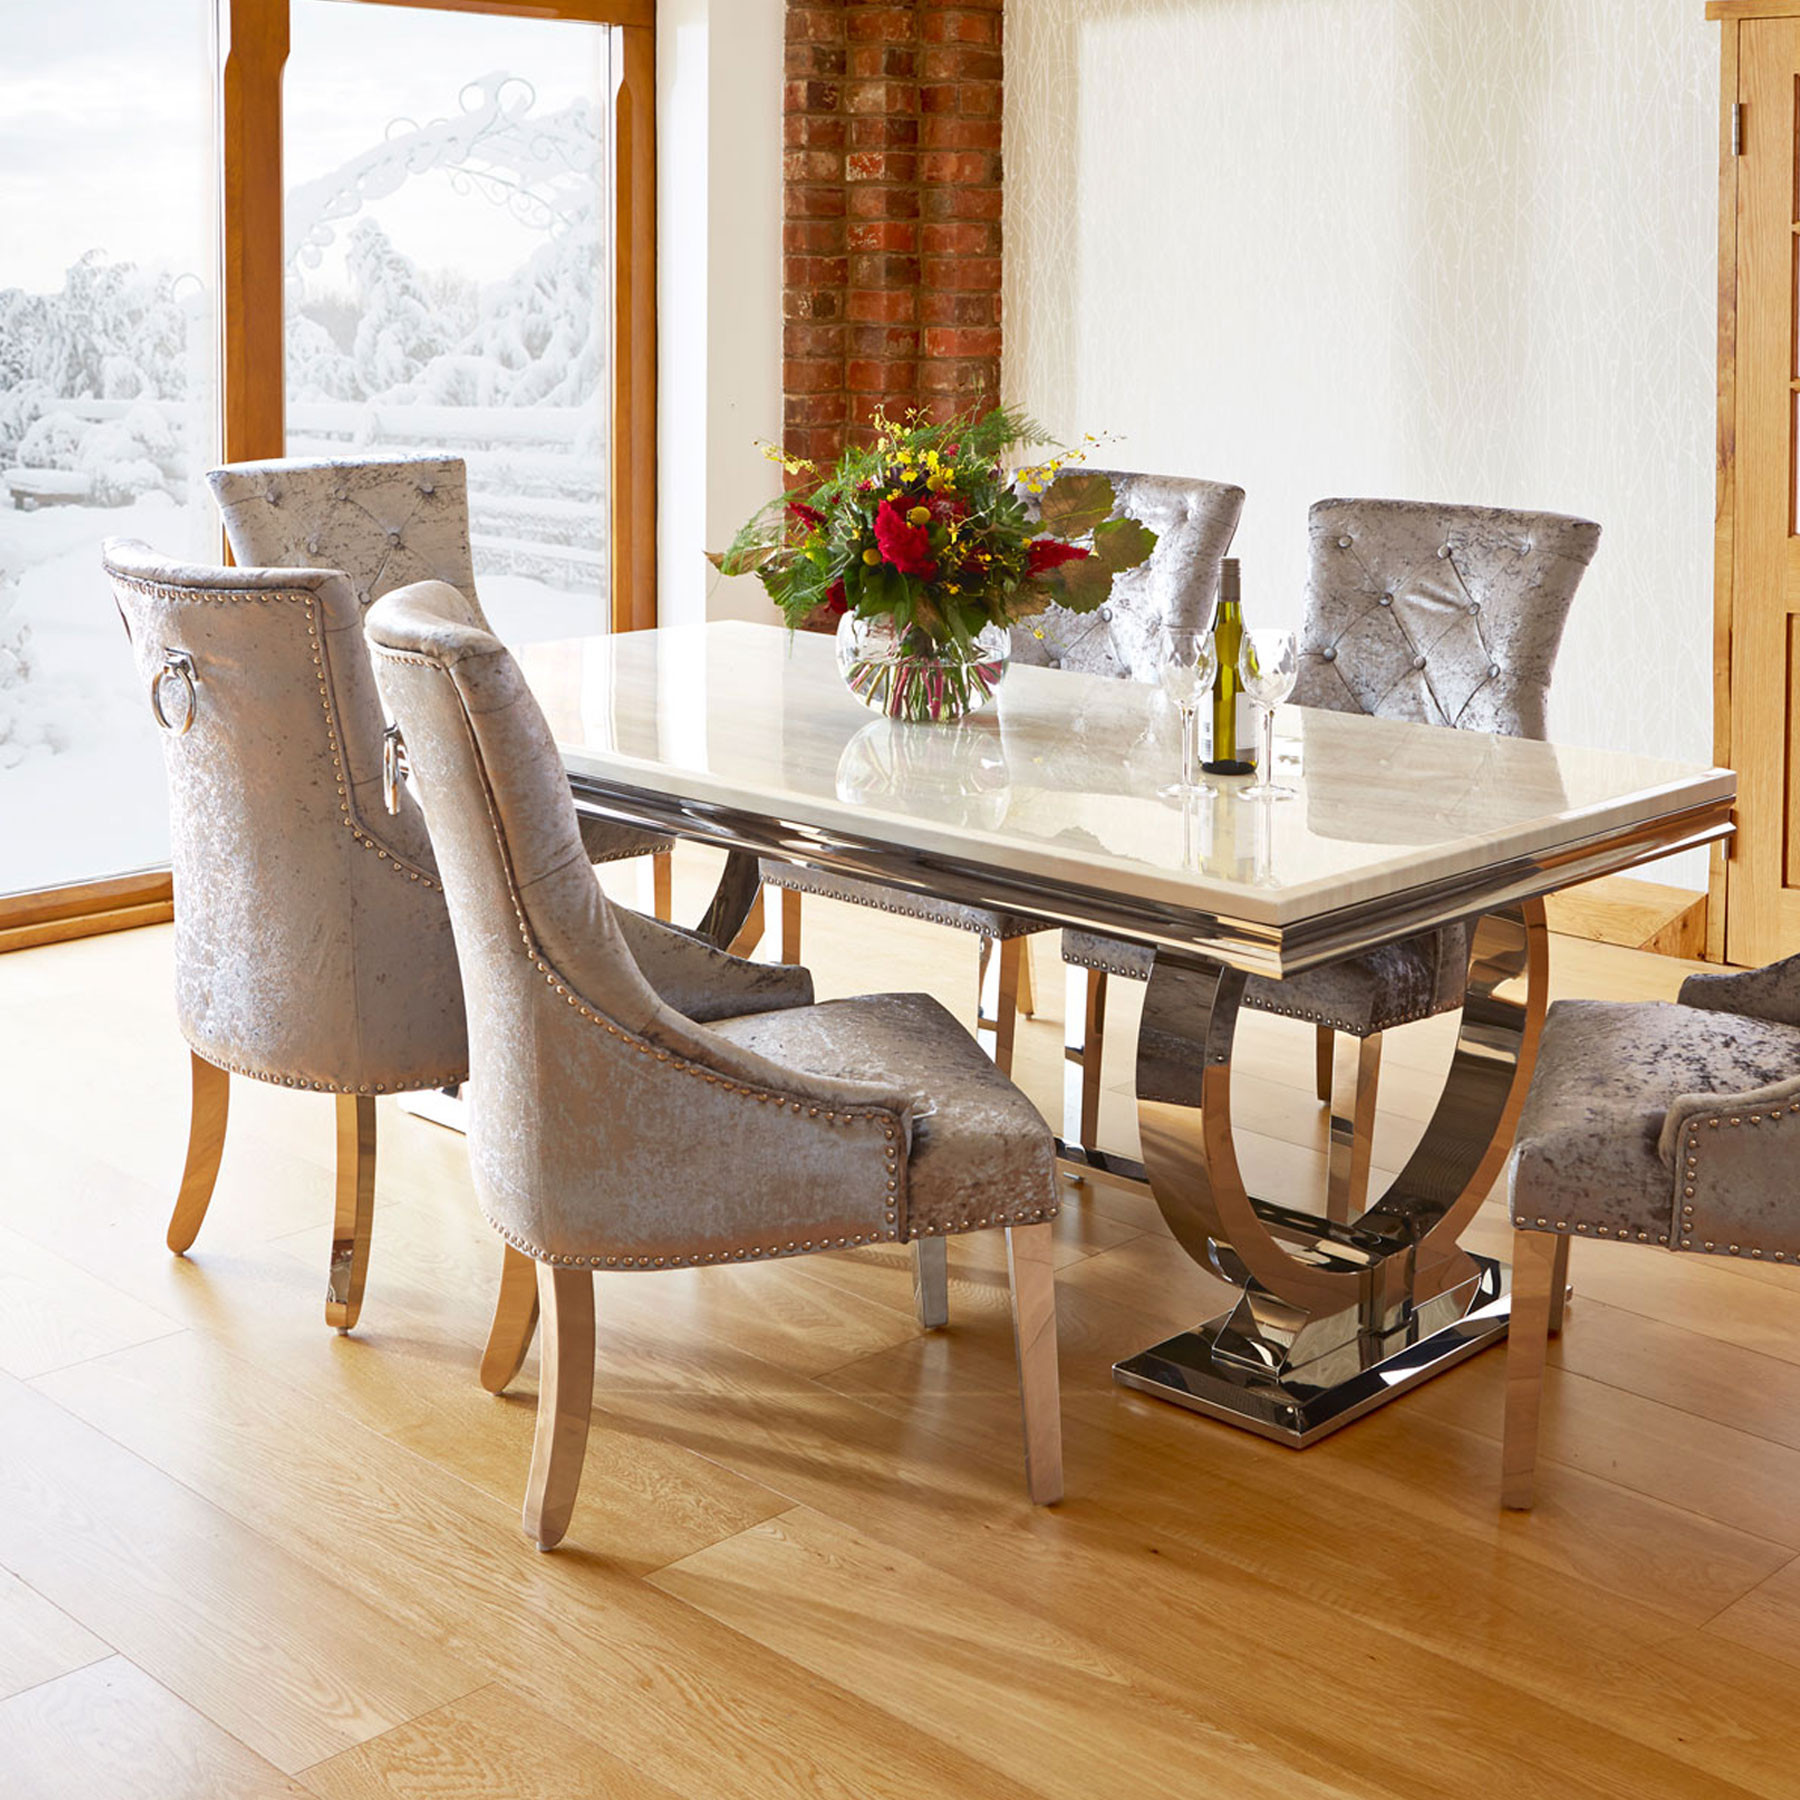 Dining tables and chairs Dining table and chairs full size of the dining room: exceptional white food FTOBEXR